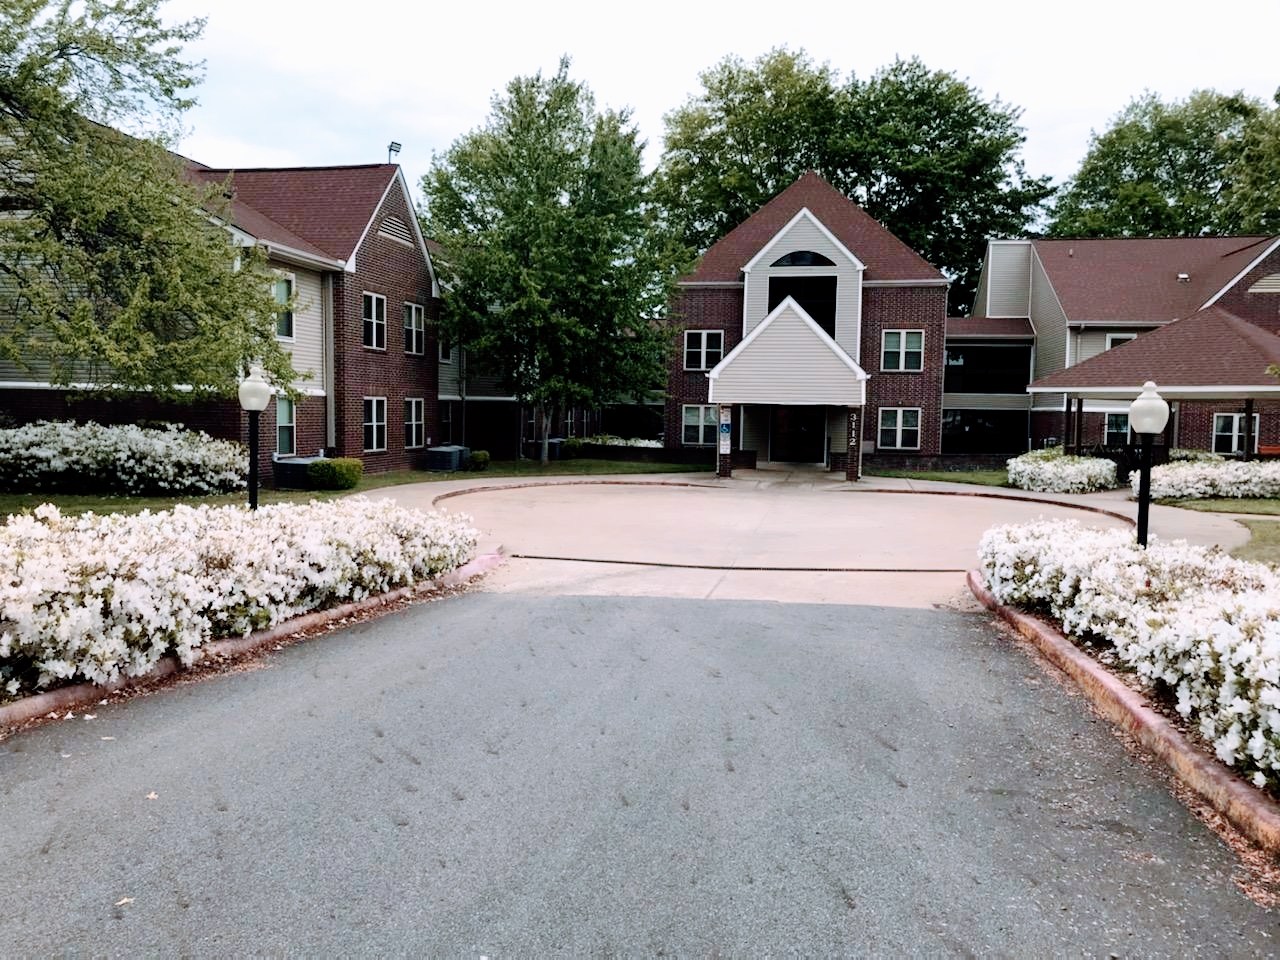 Photo of INGLEWOOD MANOR APARTMENTS at 3112 W 2ND CT RUSSELLVILLE, AR 72801